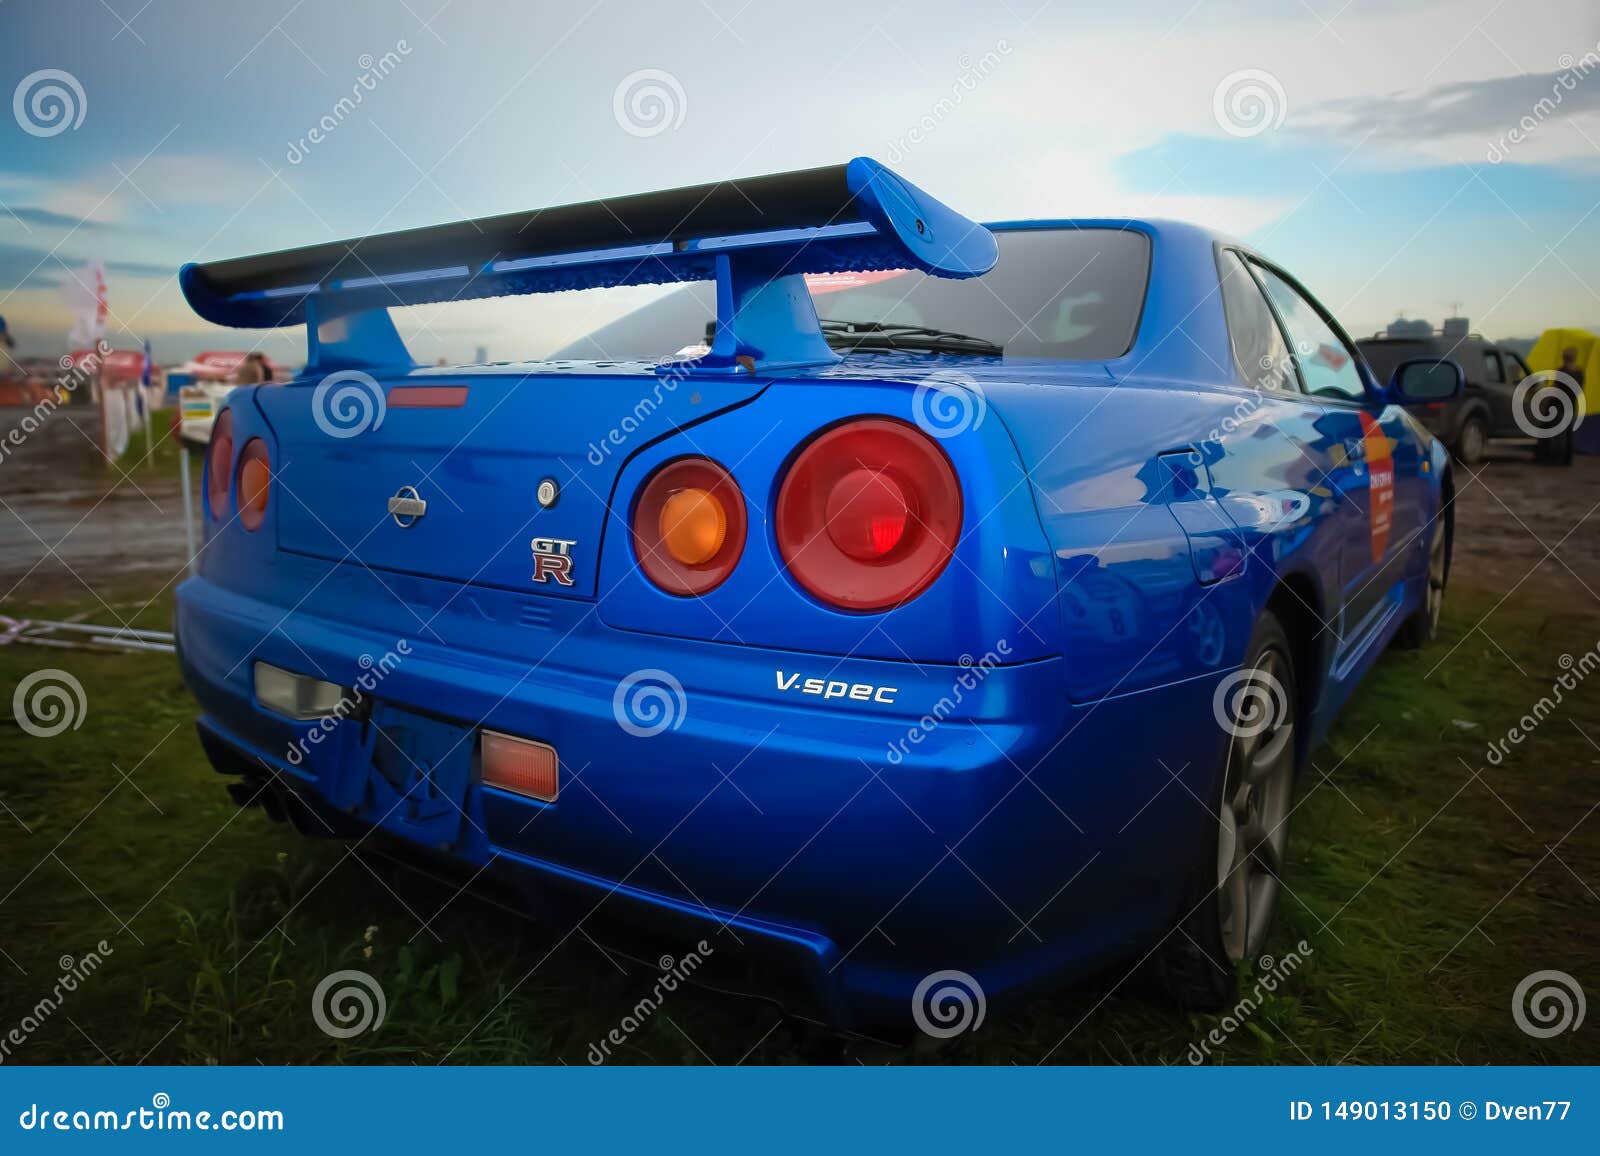 Moscow Russia May 25 19 The Blue Color Nissan Skyline Gtr R34 Stands On The Grass Editorial Image Image Of Field Rain